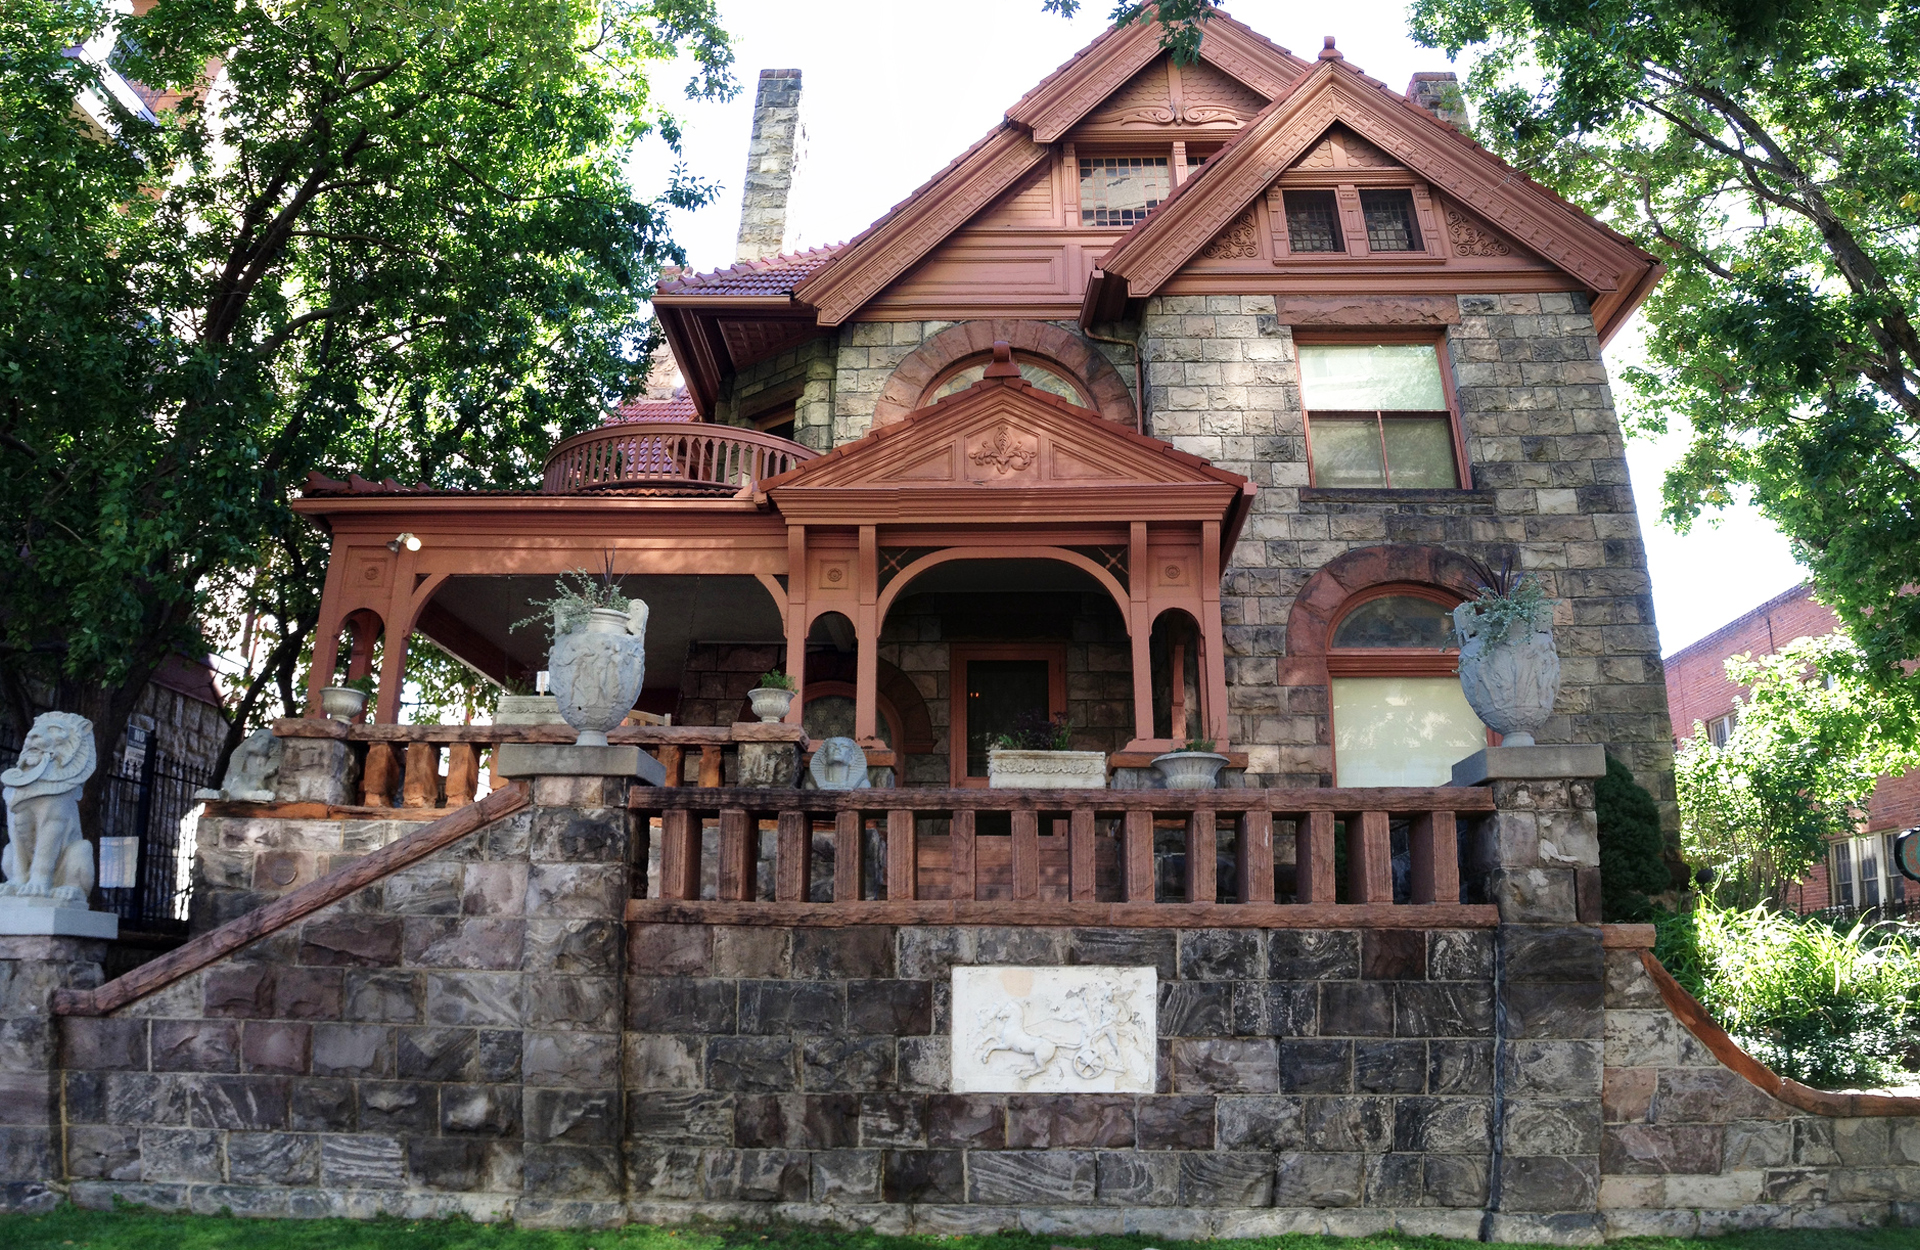 The exterior of the Molly Brown House Museum, one of several landmarks featured by Denver Story Trek 